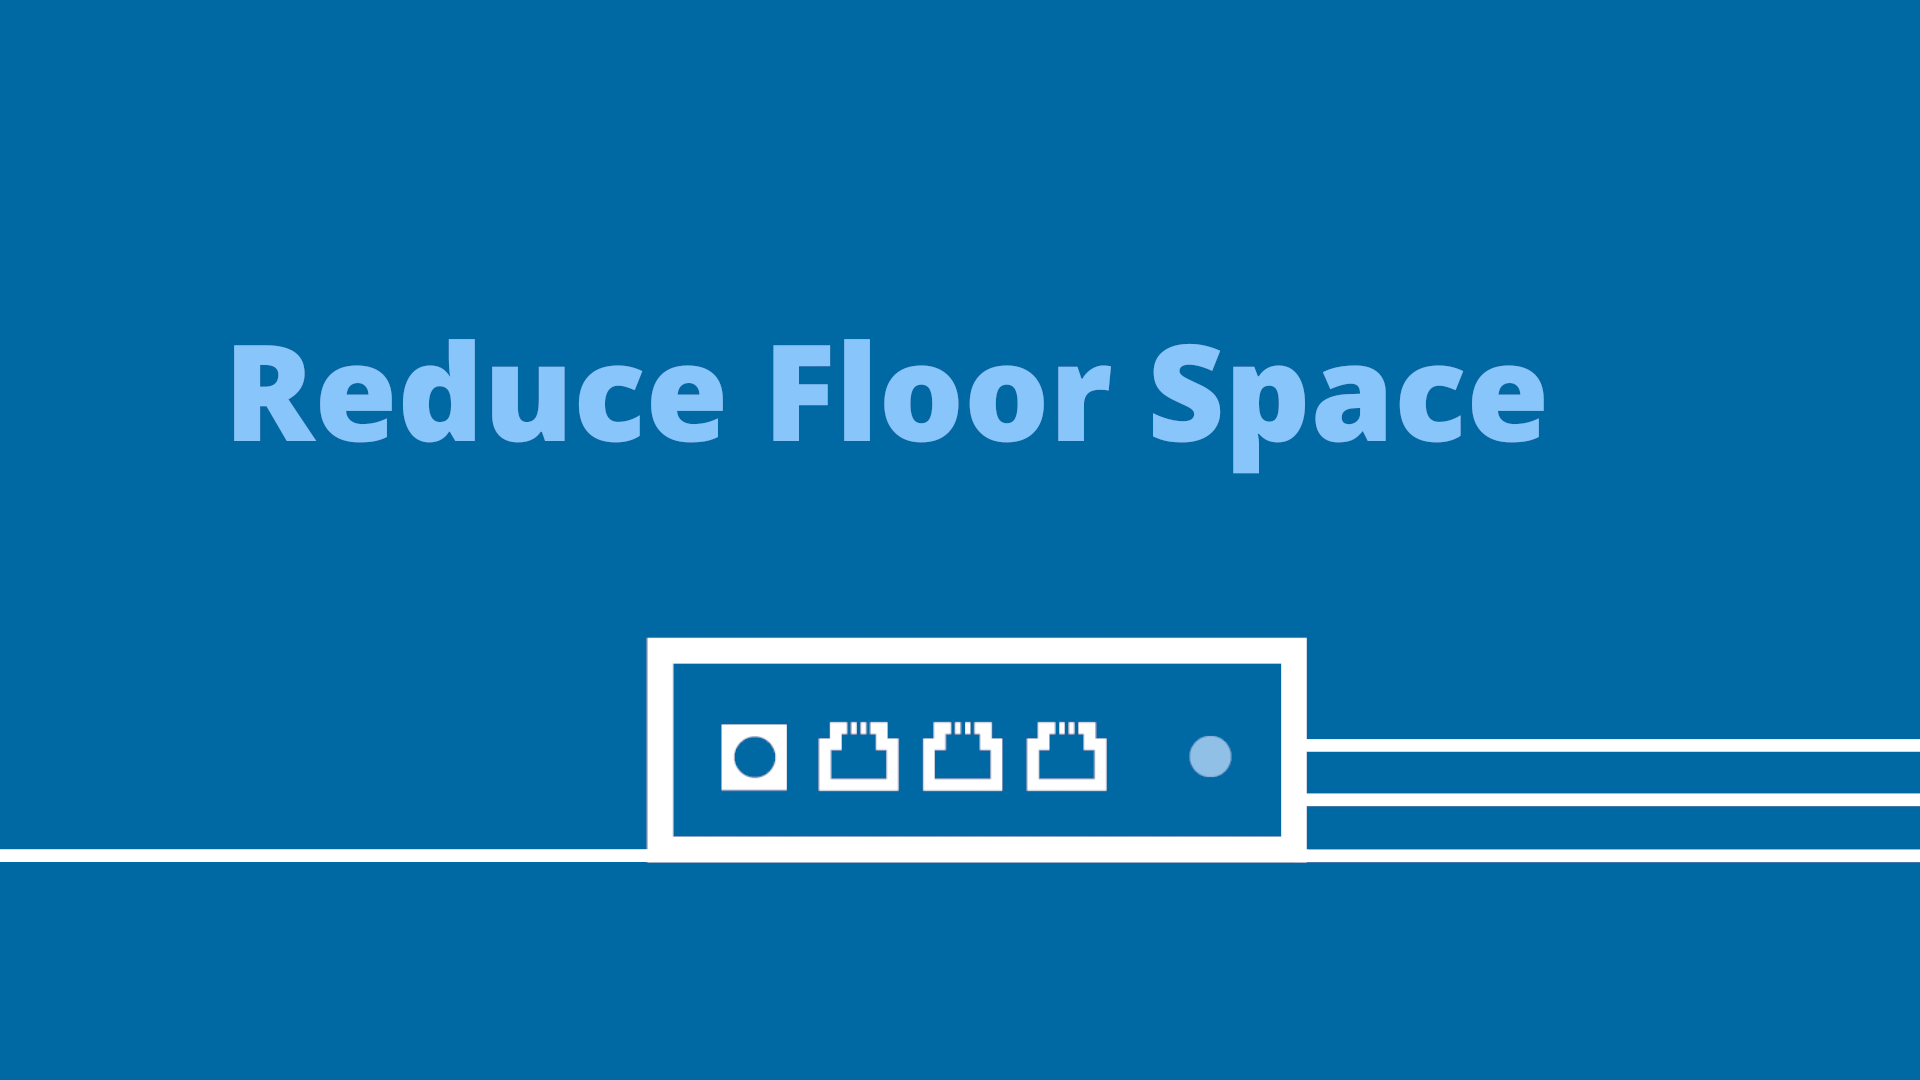 text reading reduce floor space and an illustration of a terminal. Enabling brand progression